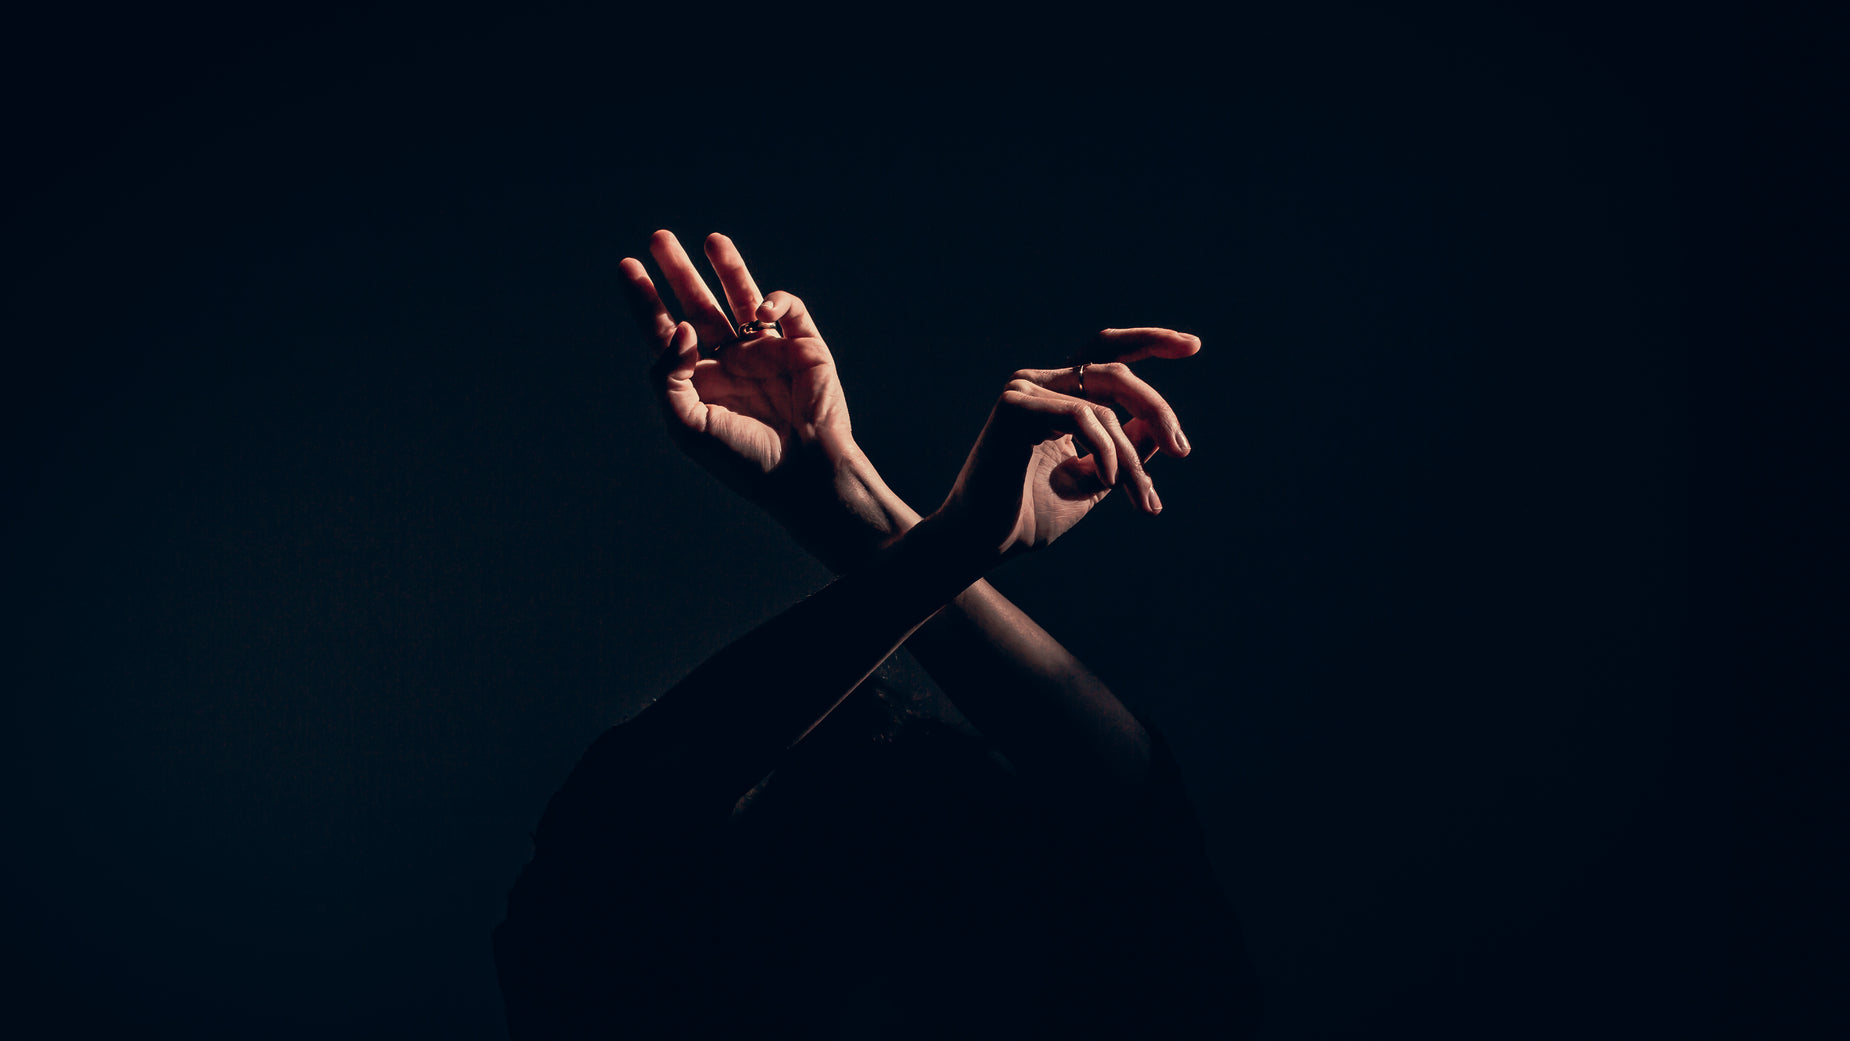 a person's hands are outstretched on a black background